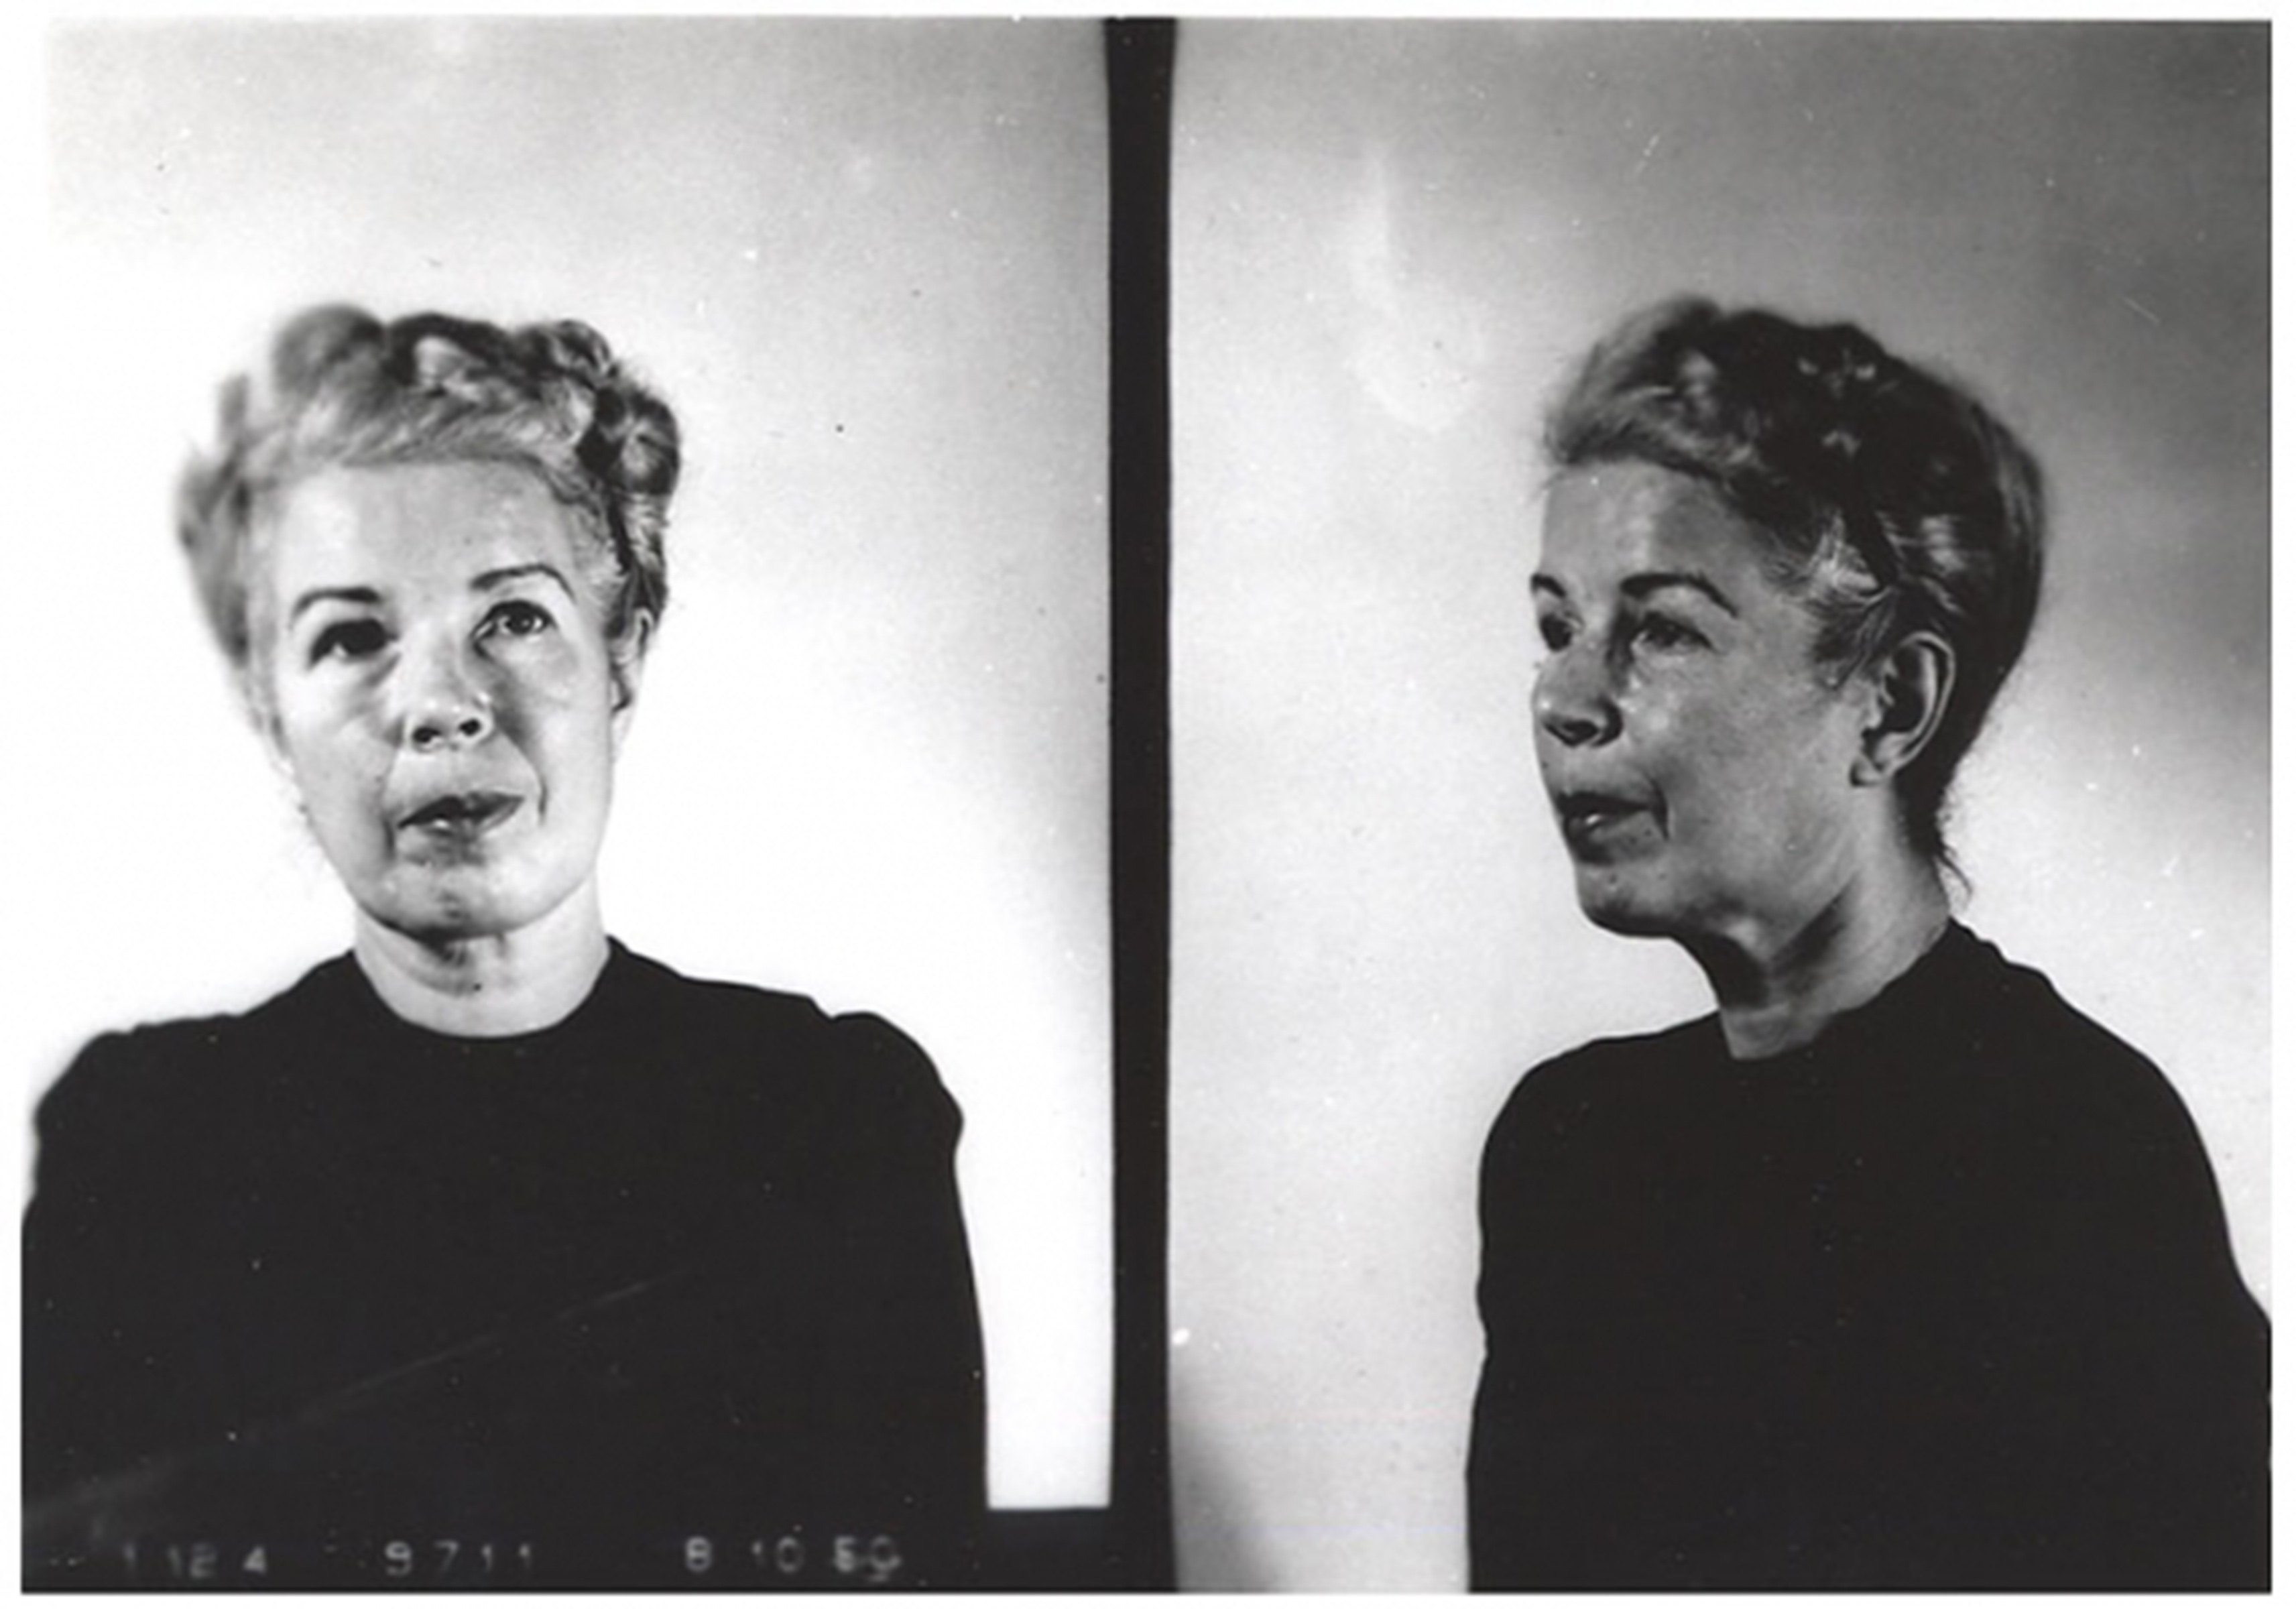 Axis Sally, aka Mildred Gillars, poses for a mugshot in 1949. (Bureau of Prisons/Getty Images)